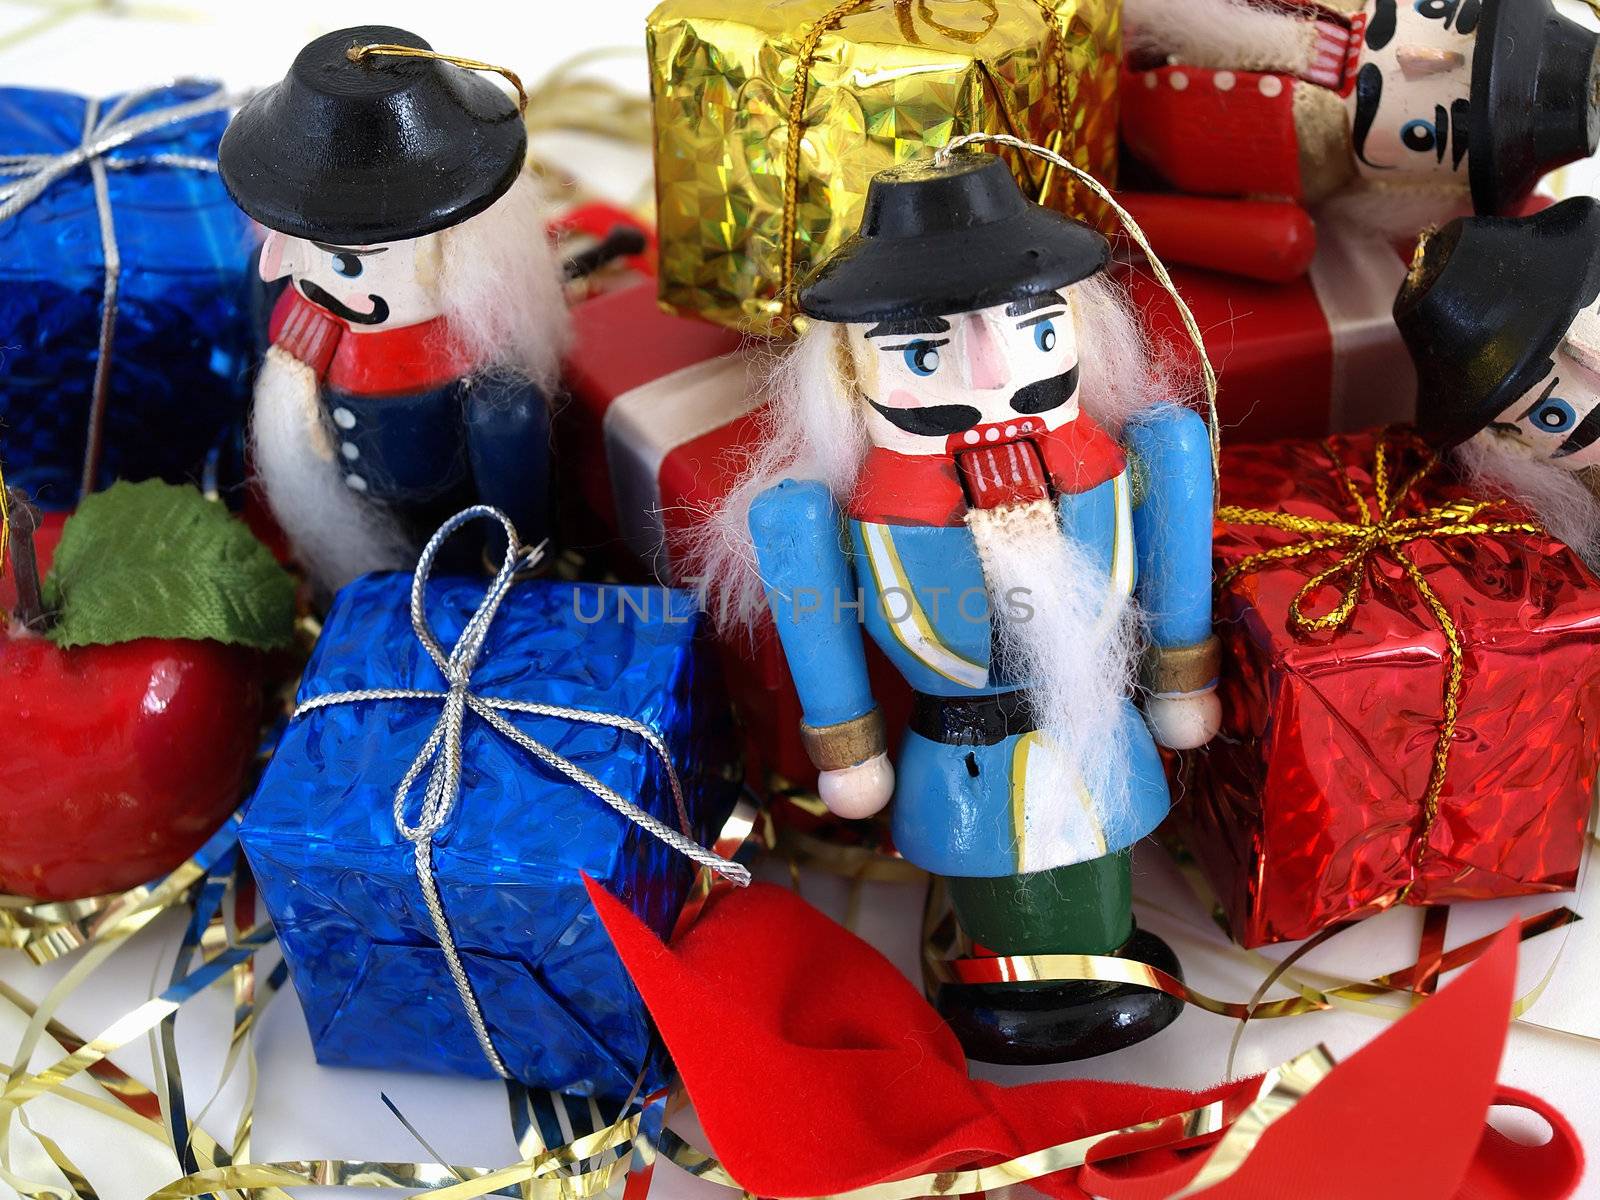 Nutcracker tree ornaments shown with colorful gift boxes. Studio isolated over white.